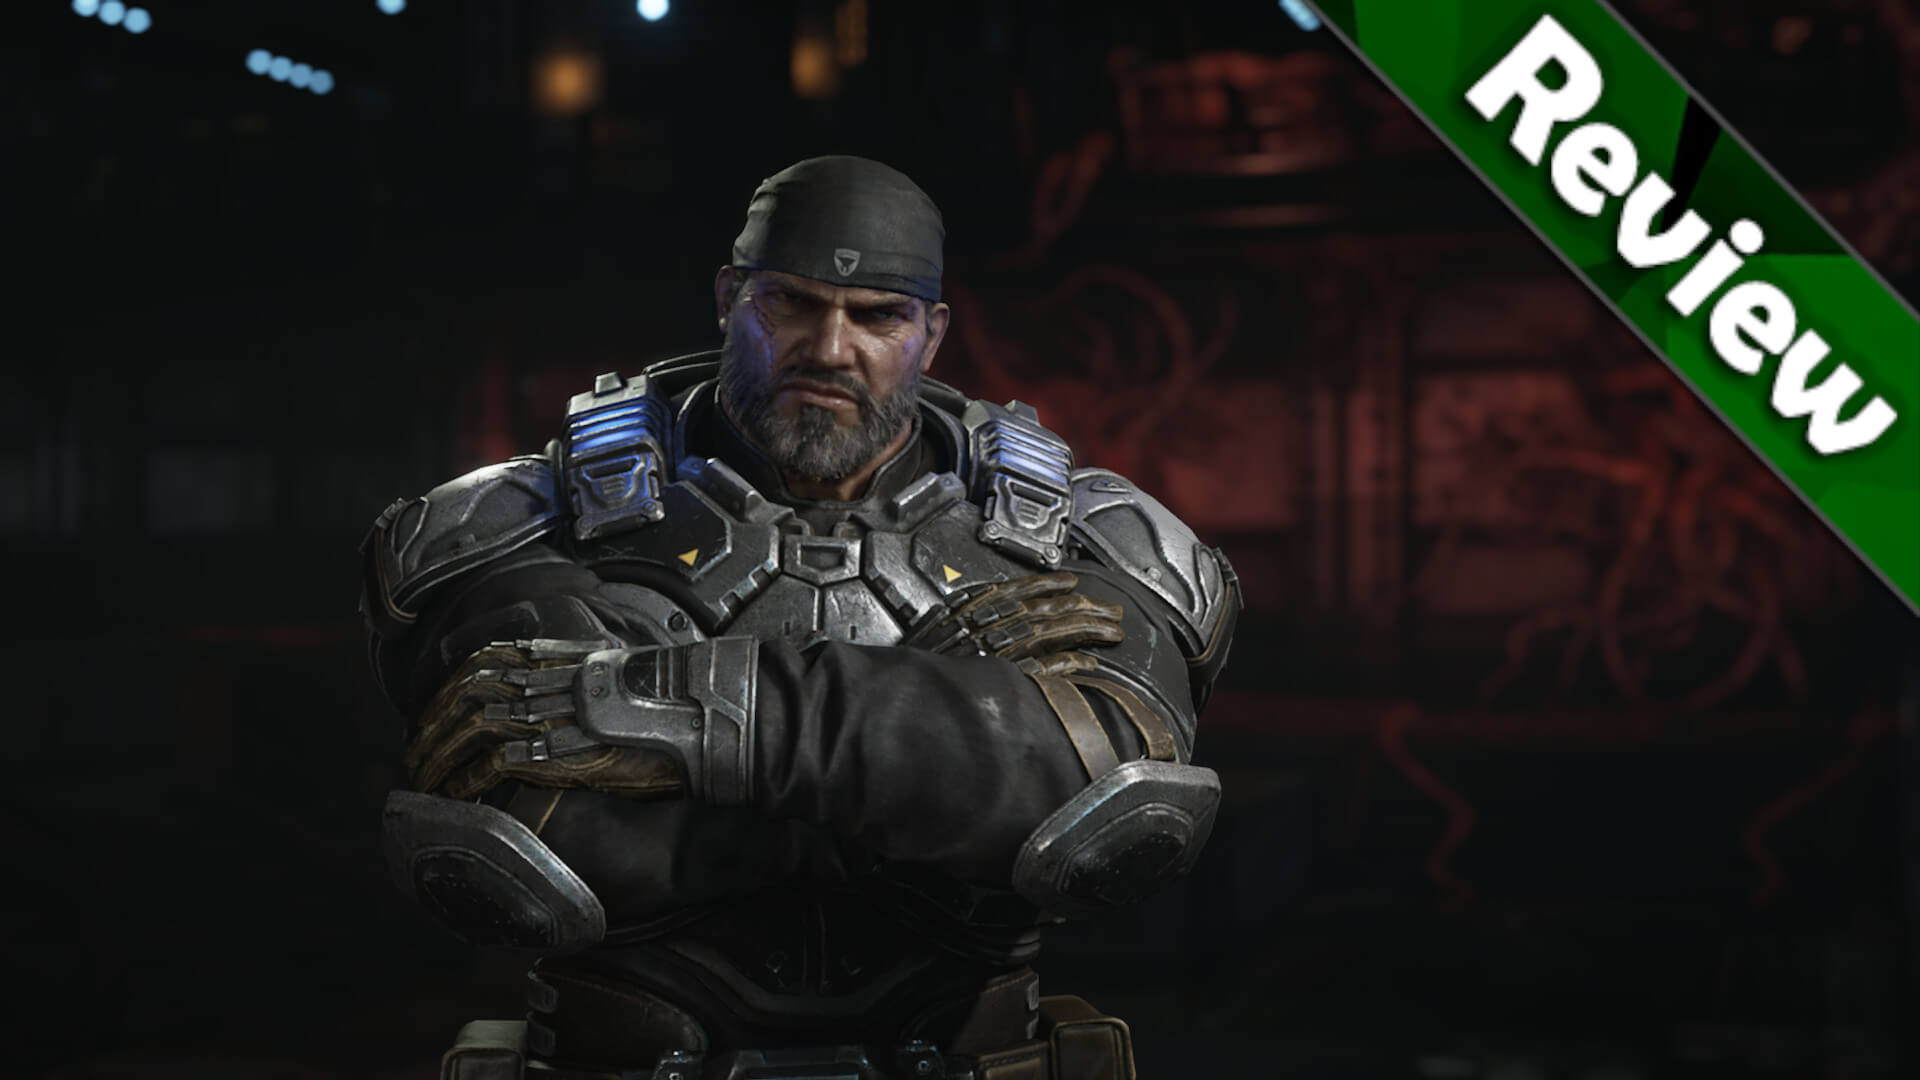 Gears 5 Final Review